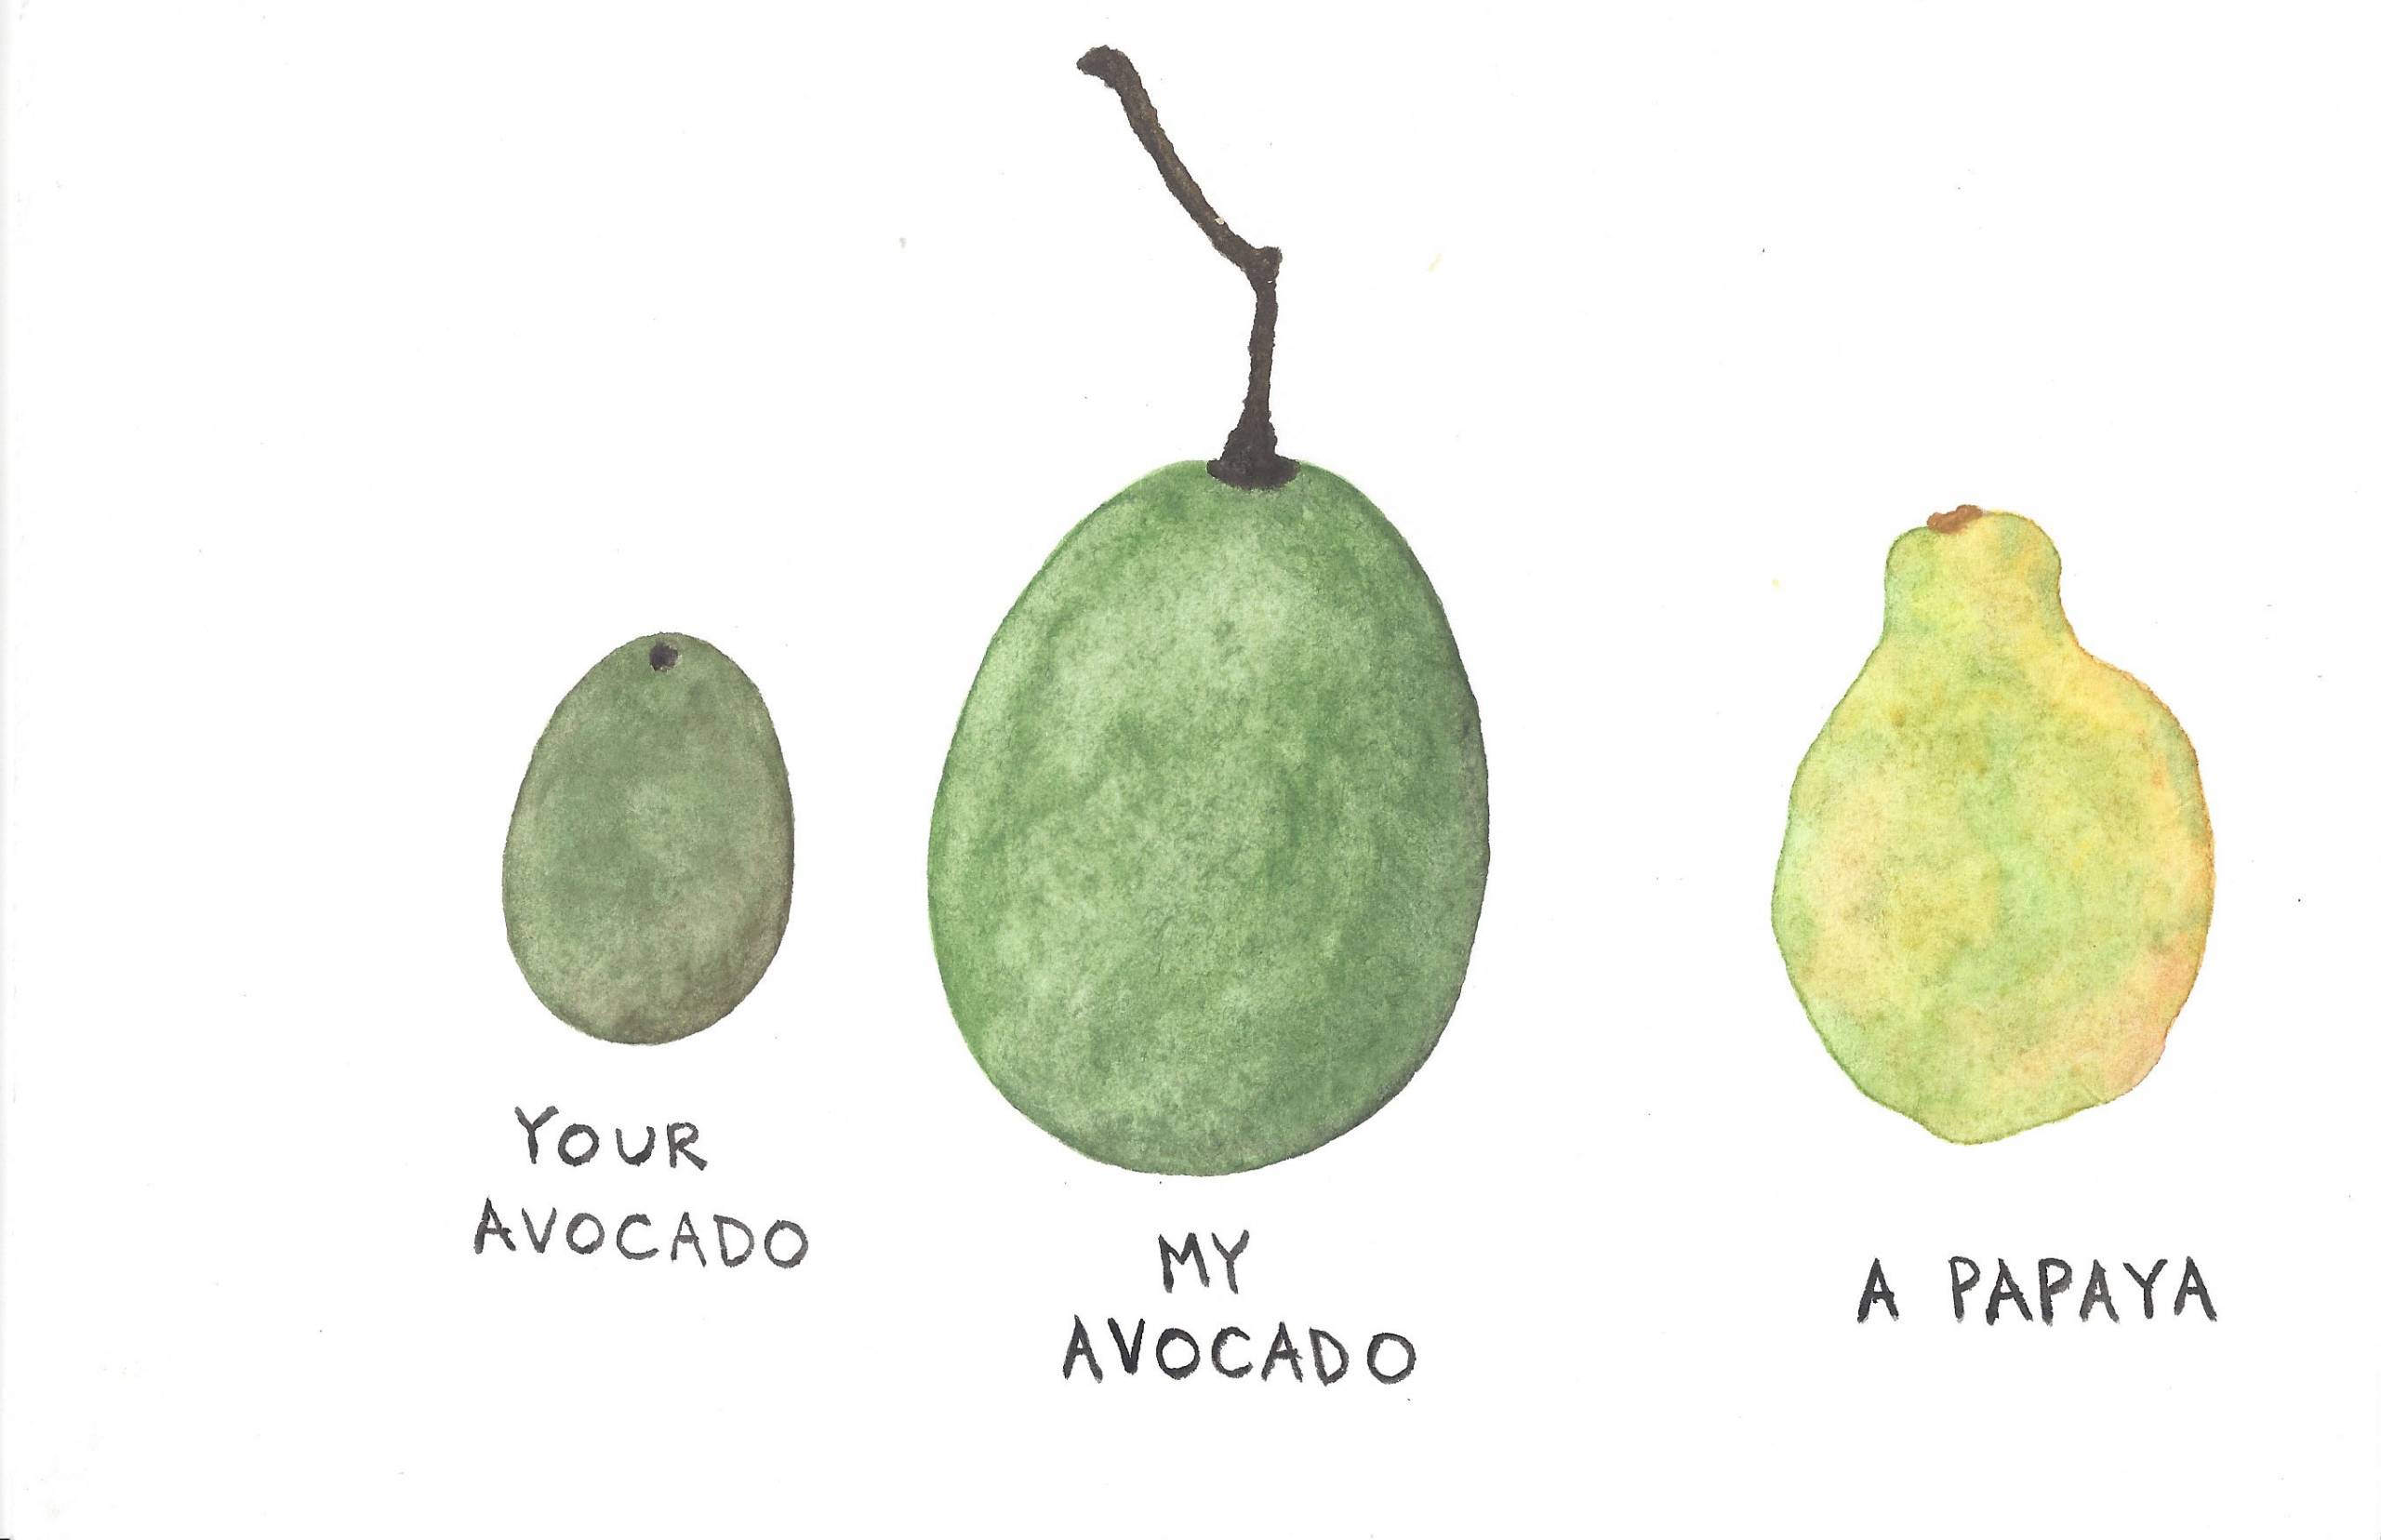 Watercolor painting of three fruits in different sizes and shades of green: "your avocado" (the smallest), "my avocado" and "a papaya."